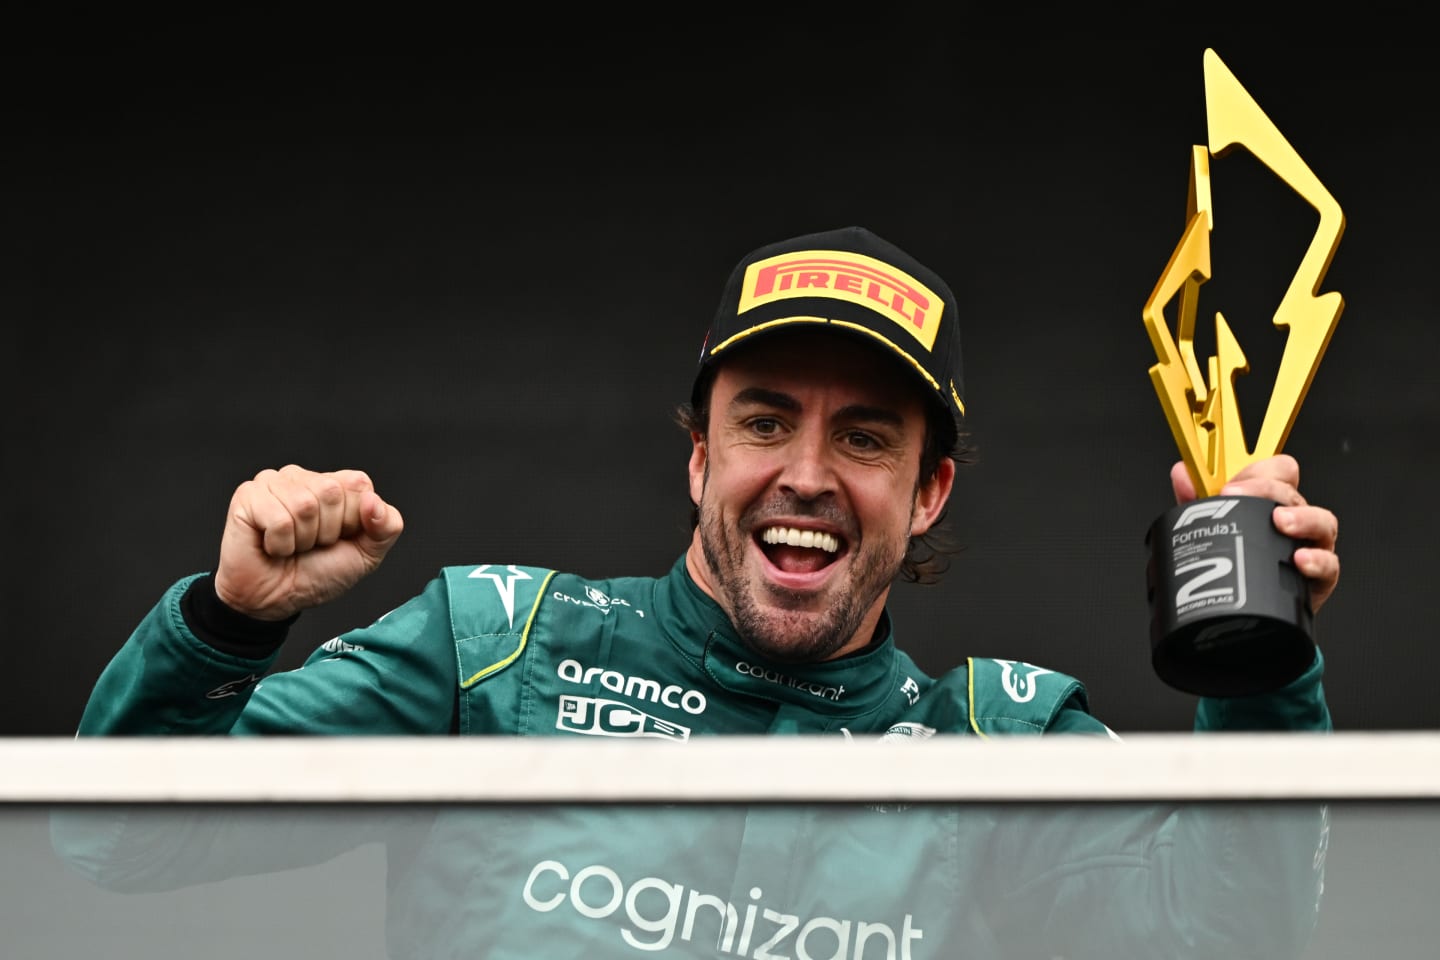 MONTREAL, QUEBEC - JUNE 18: Second placed Fernando Alonso of Spain and Aston Martin F1 Team celebrates on the podium during the F1 Grand Prix of Canada at Circuit Gilles Villeneuve on June 18, 2023 in Montreal, Quebec. (Photo by Minas Panagiotakis/Getty Images)